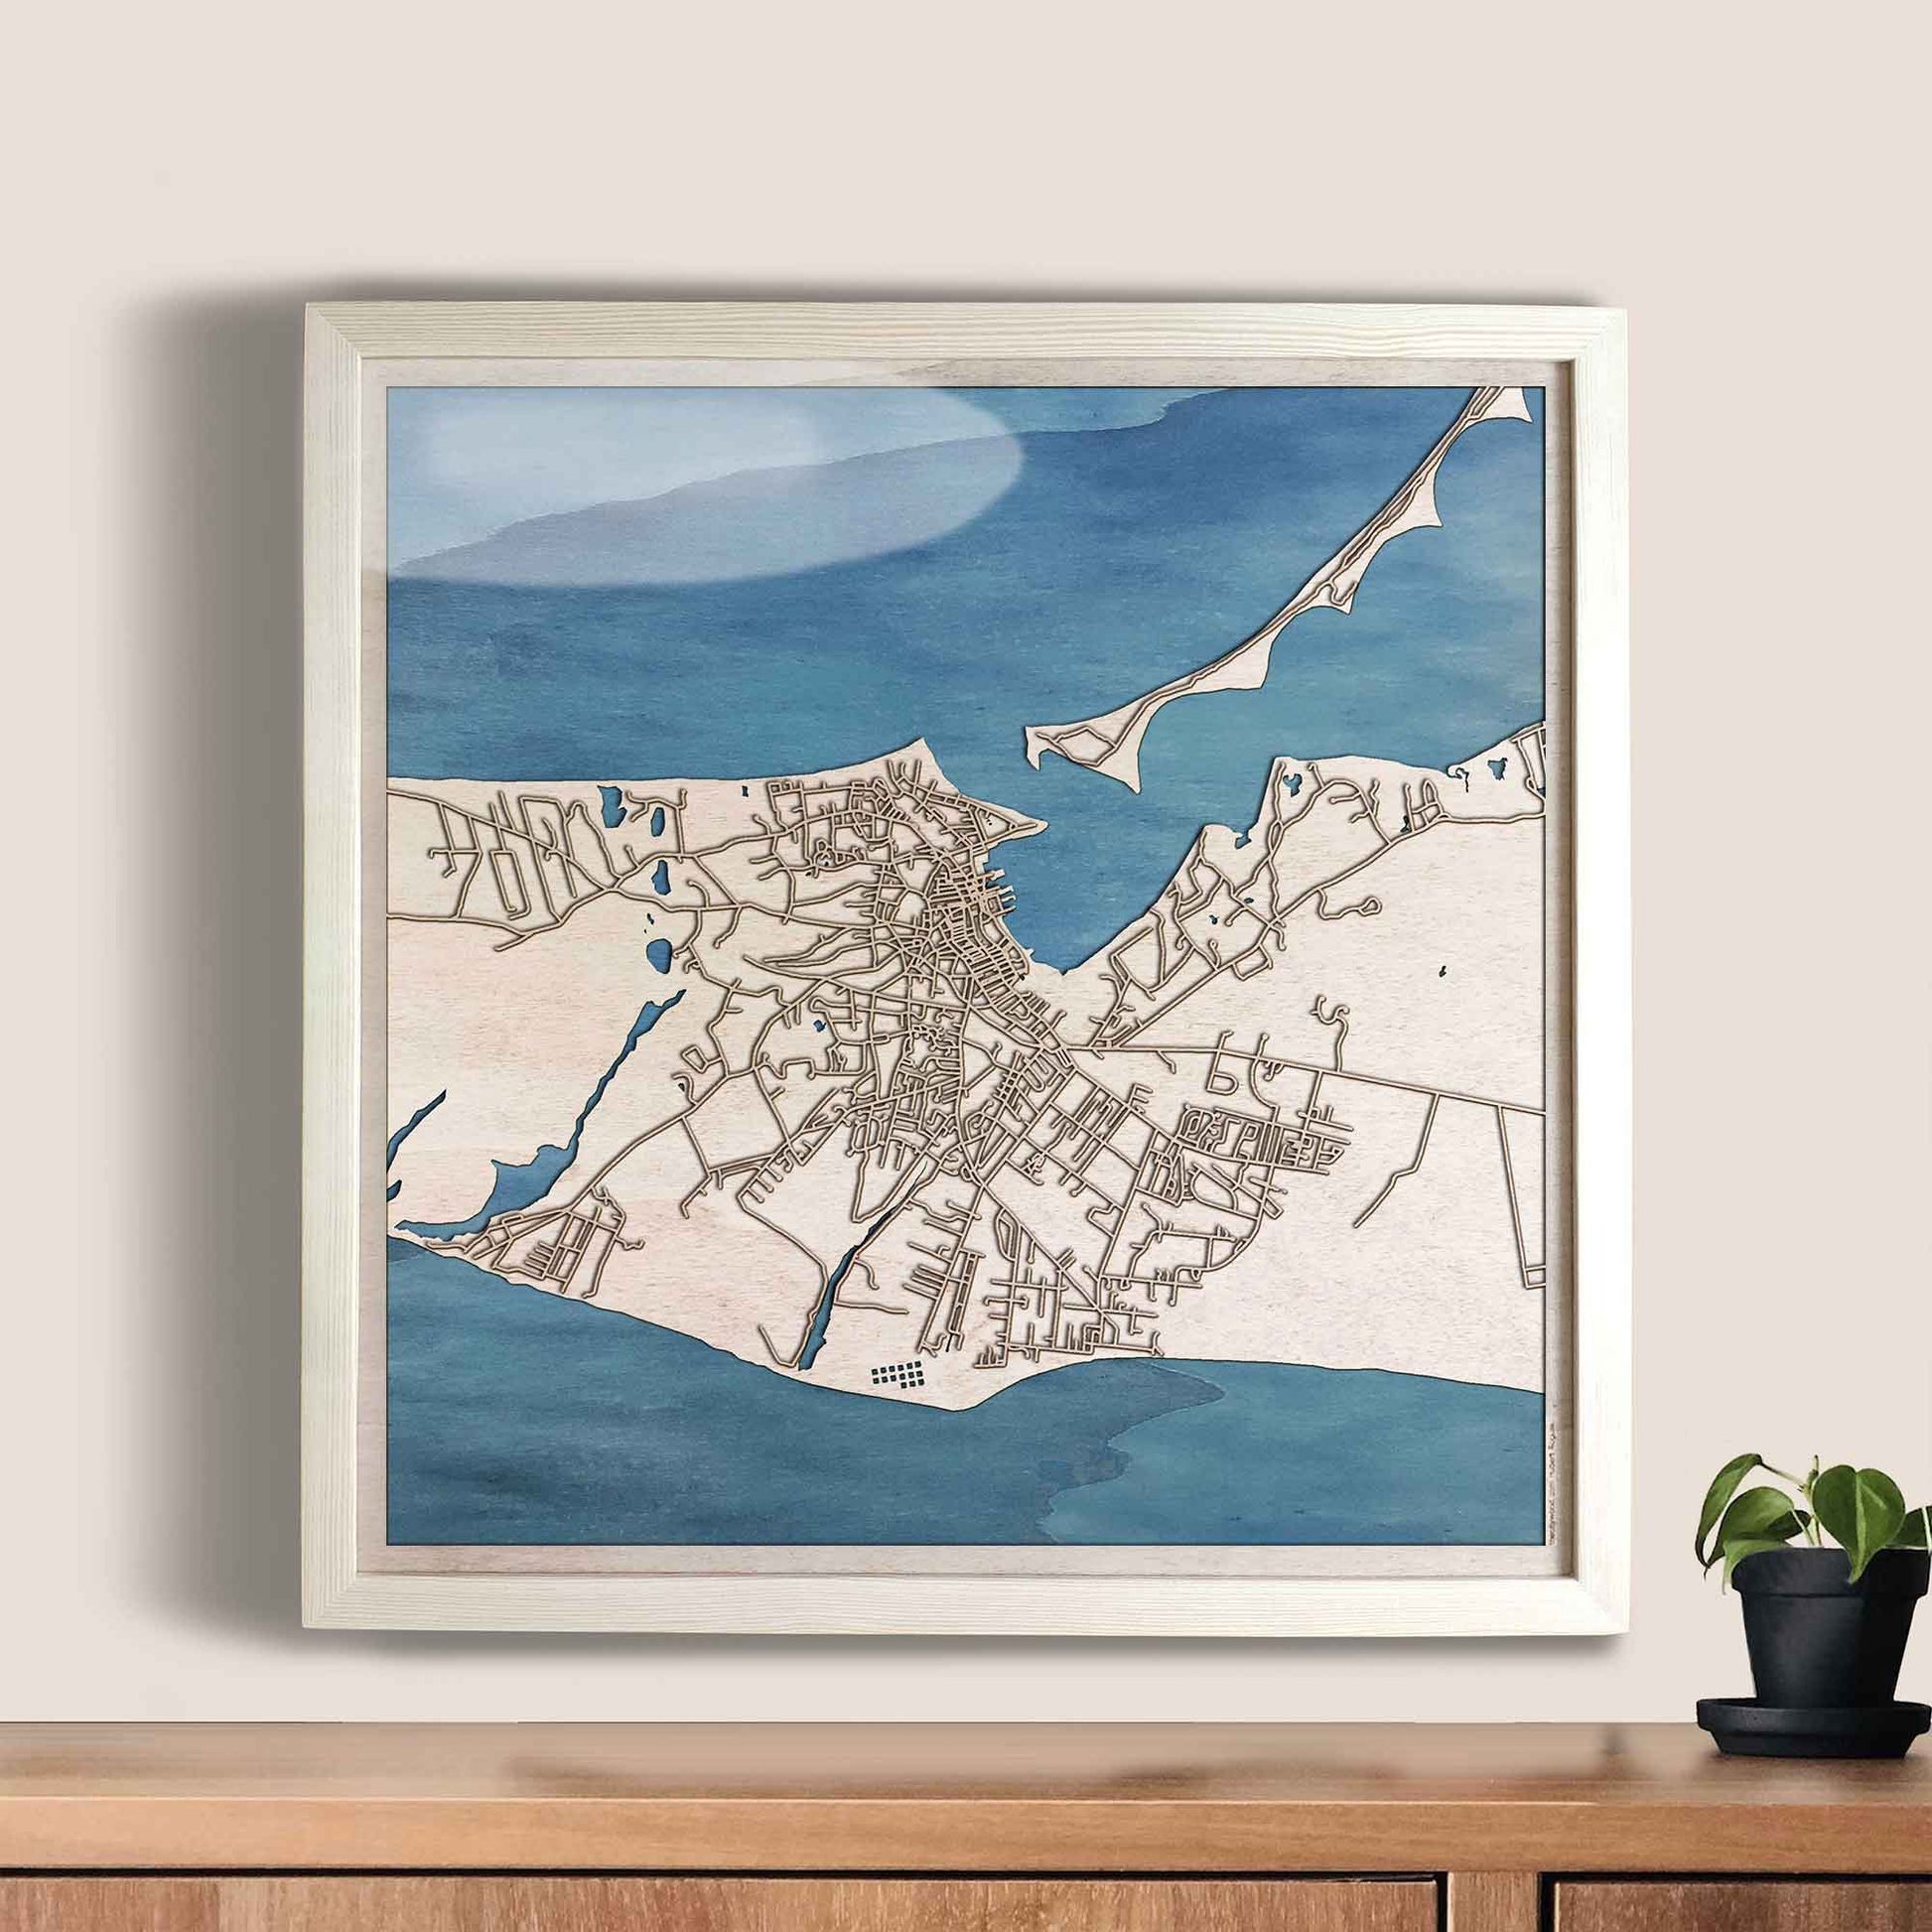 Nantucket Wooden Map by CityWood - Custom Wood Map Art - Unique Laser Cut Engraved - Anniversary Gift